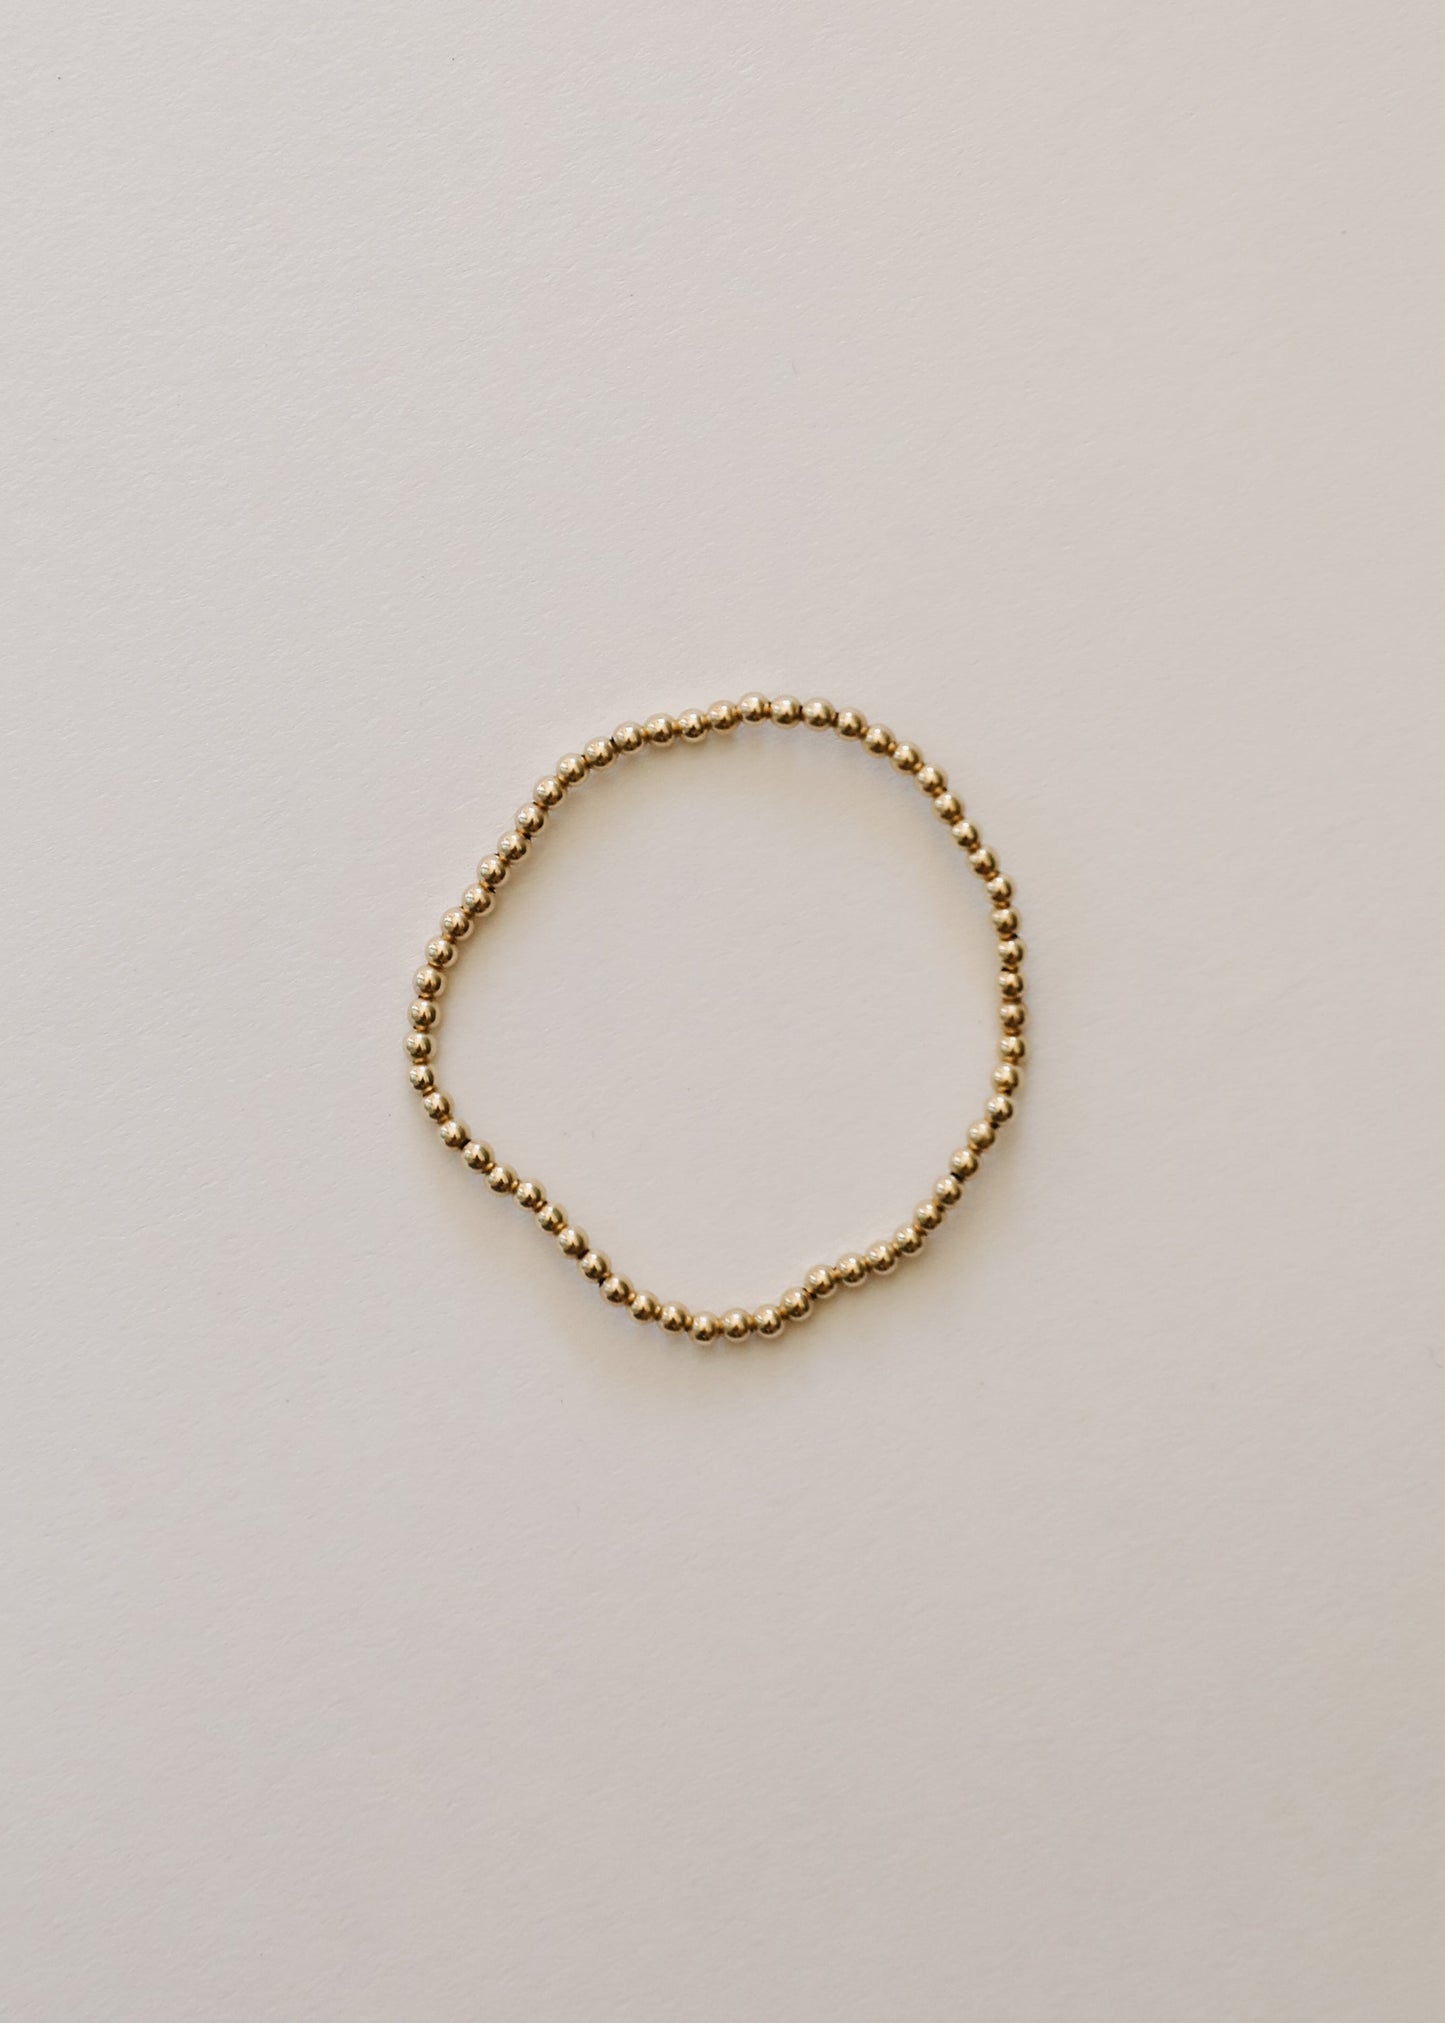 Gold Beaded Bracelets - Create Your Own Stack